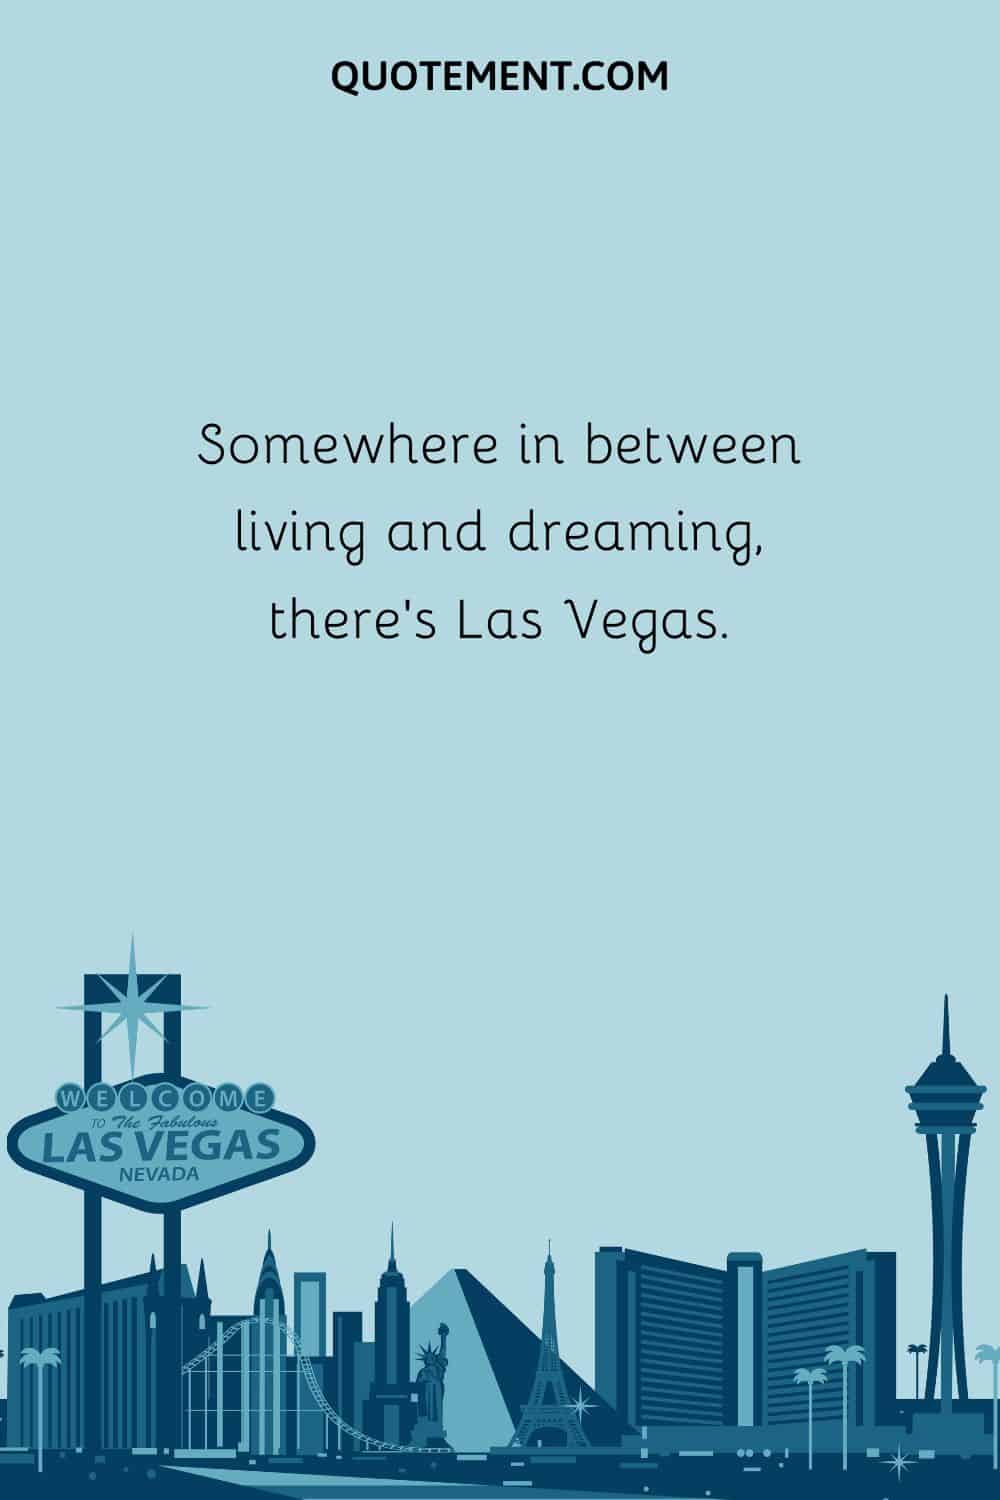 Somewhere in between living and dreaming, there’s Las Vegas.